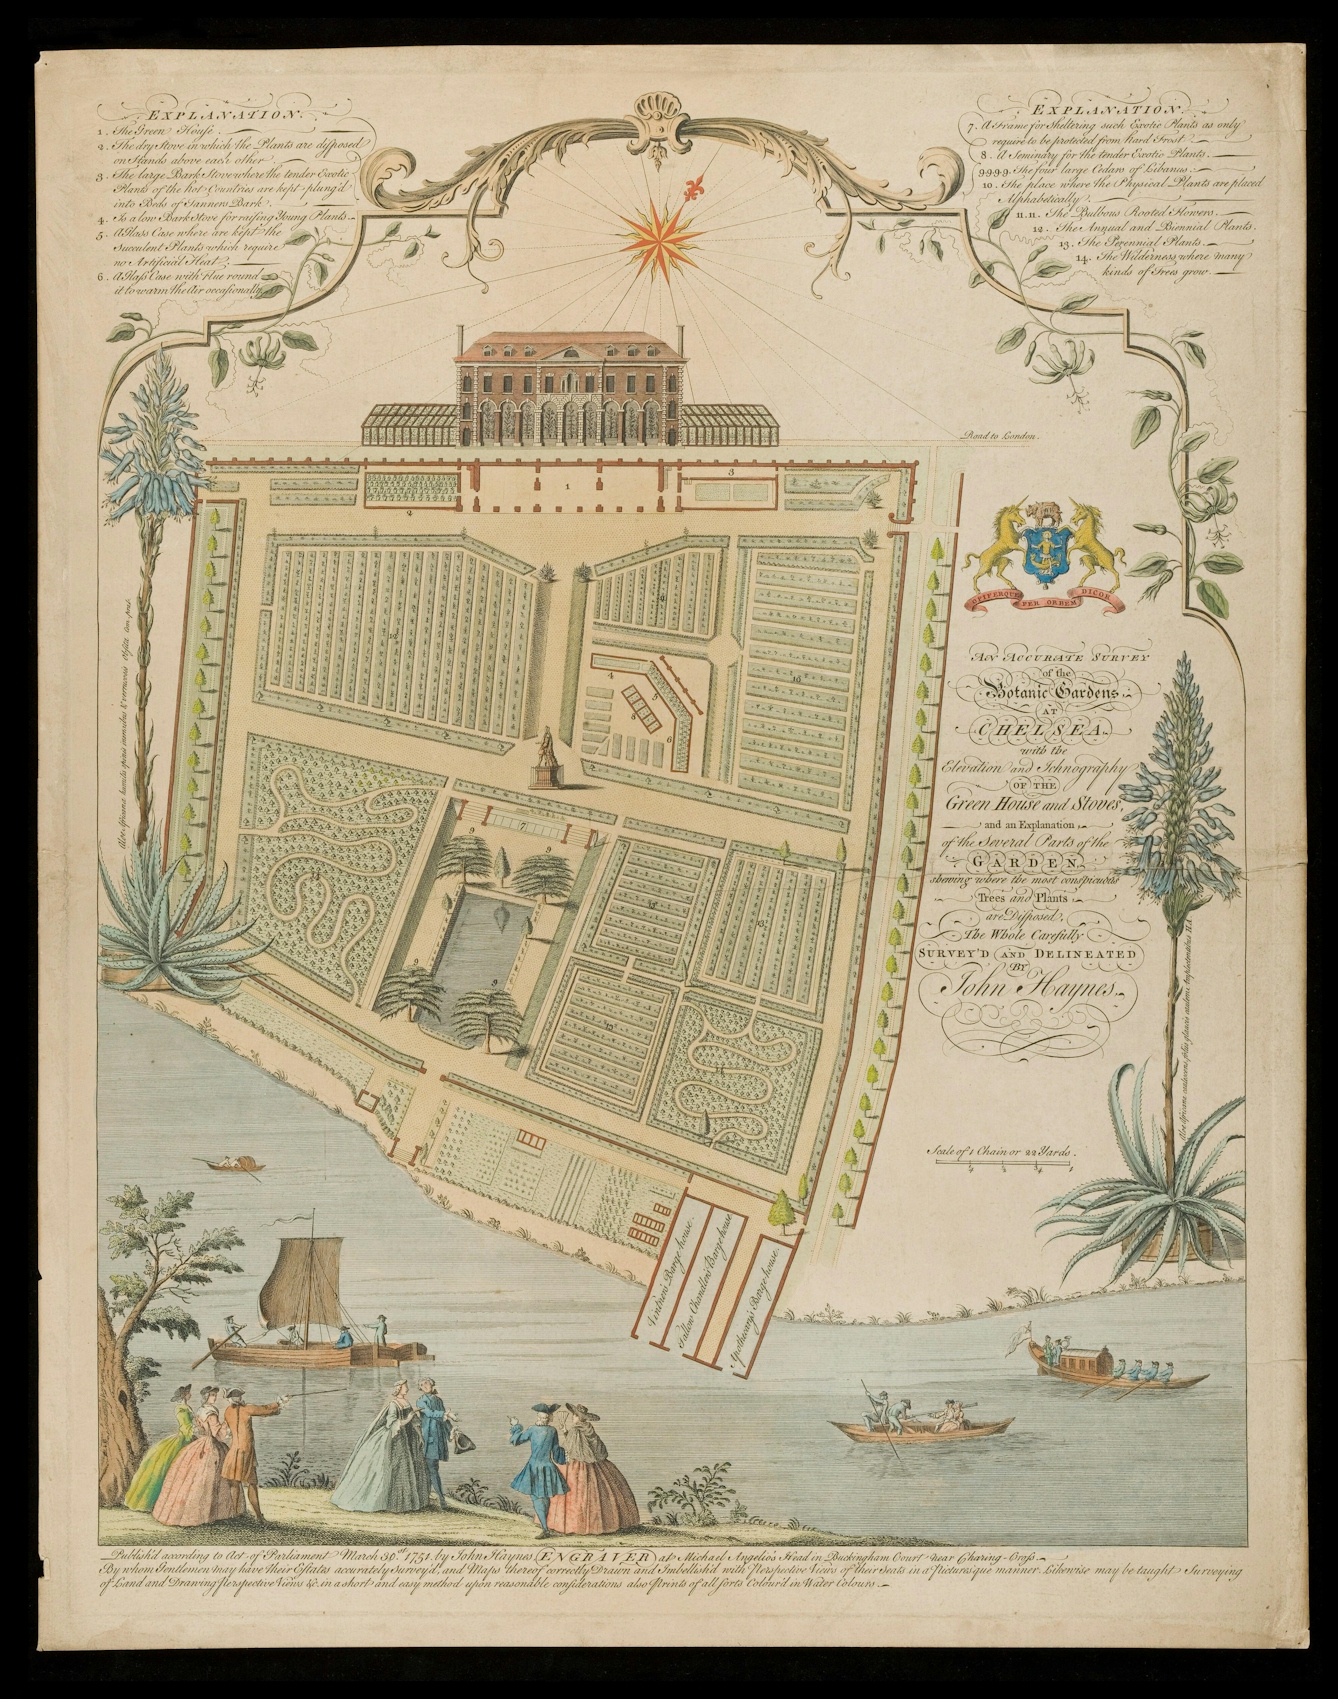 Decorative, colour illustration showing plans for a formal-looking physic garden, set in front of a grand house.